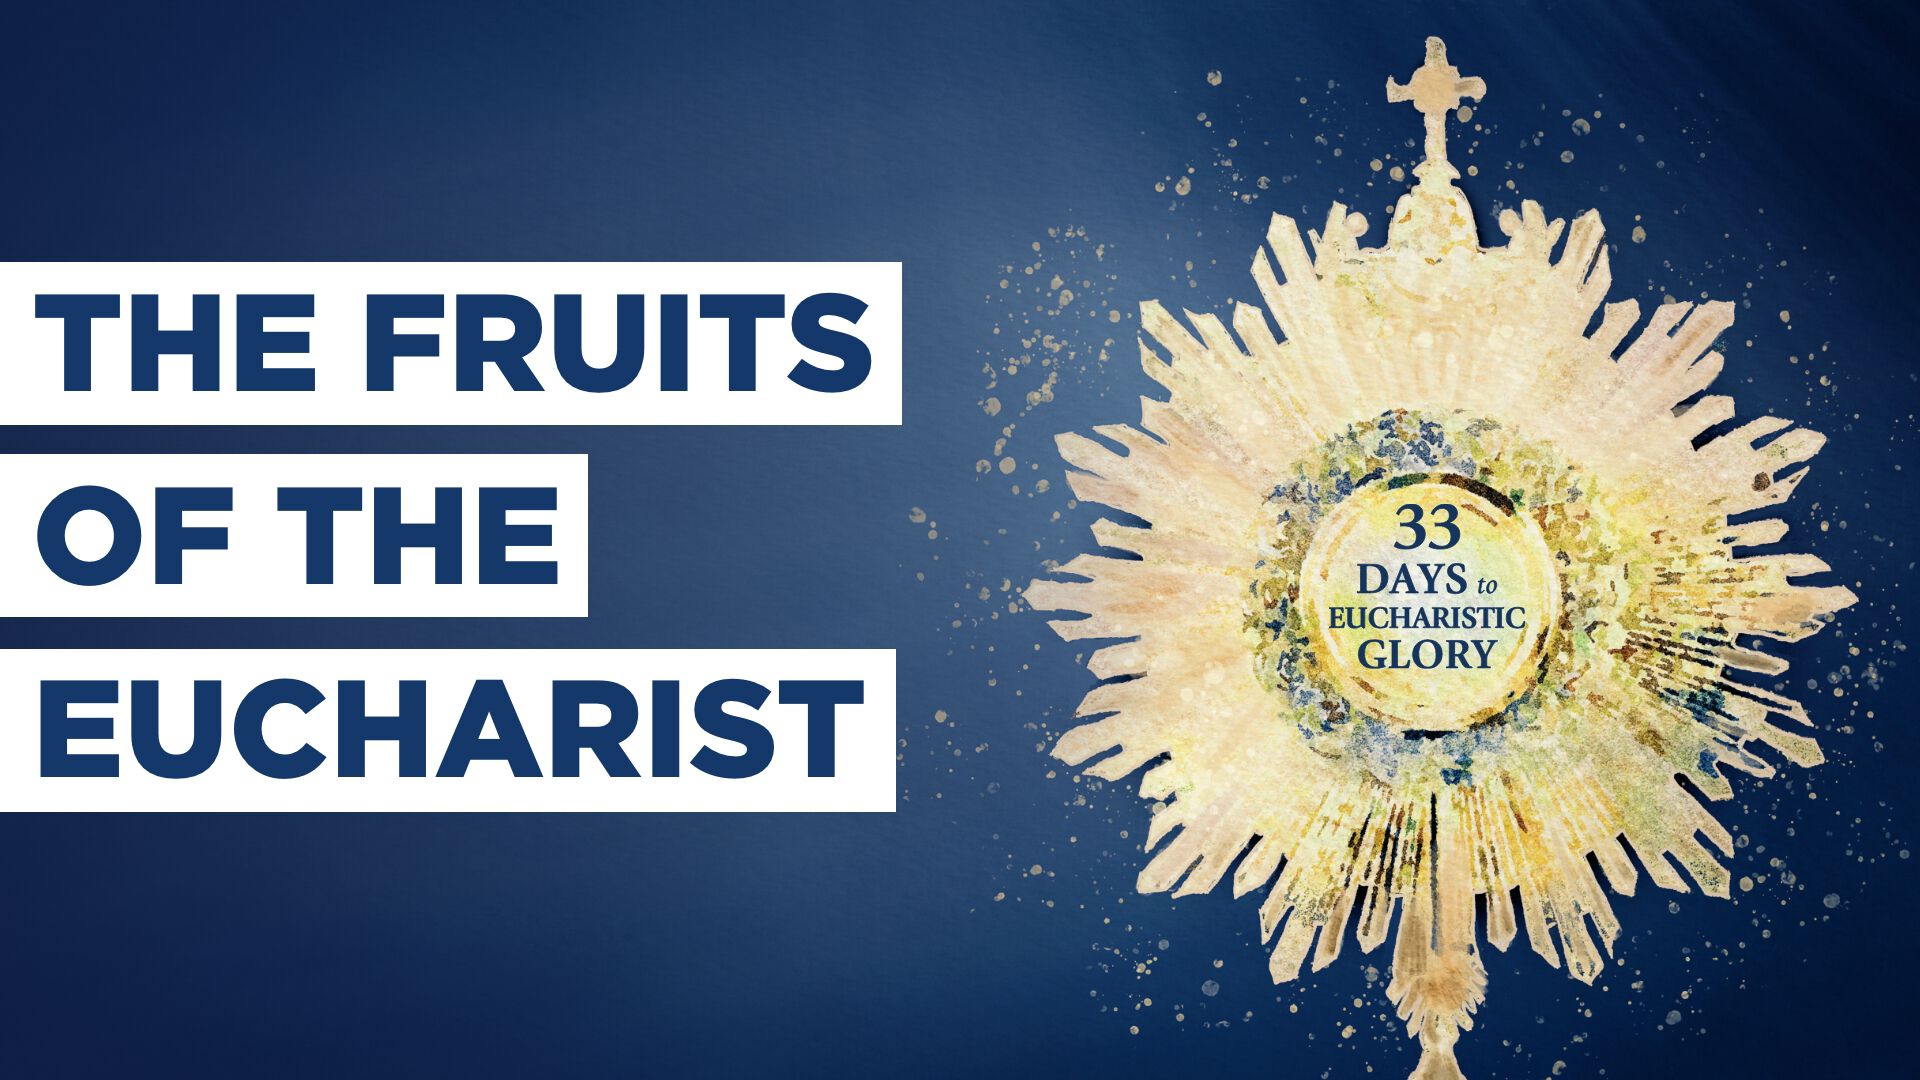 The Fruits of the Eucharist